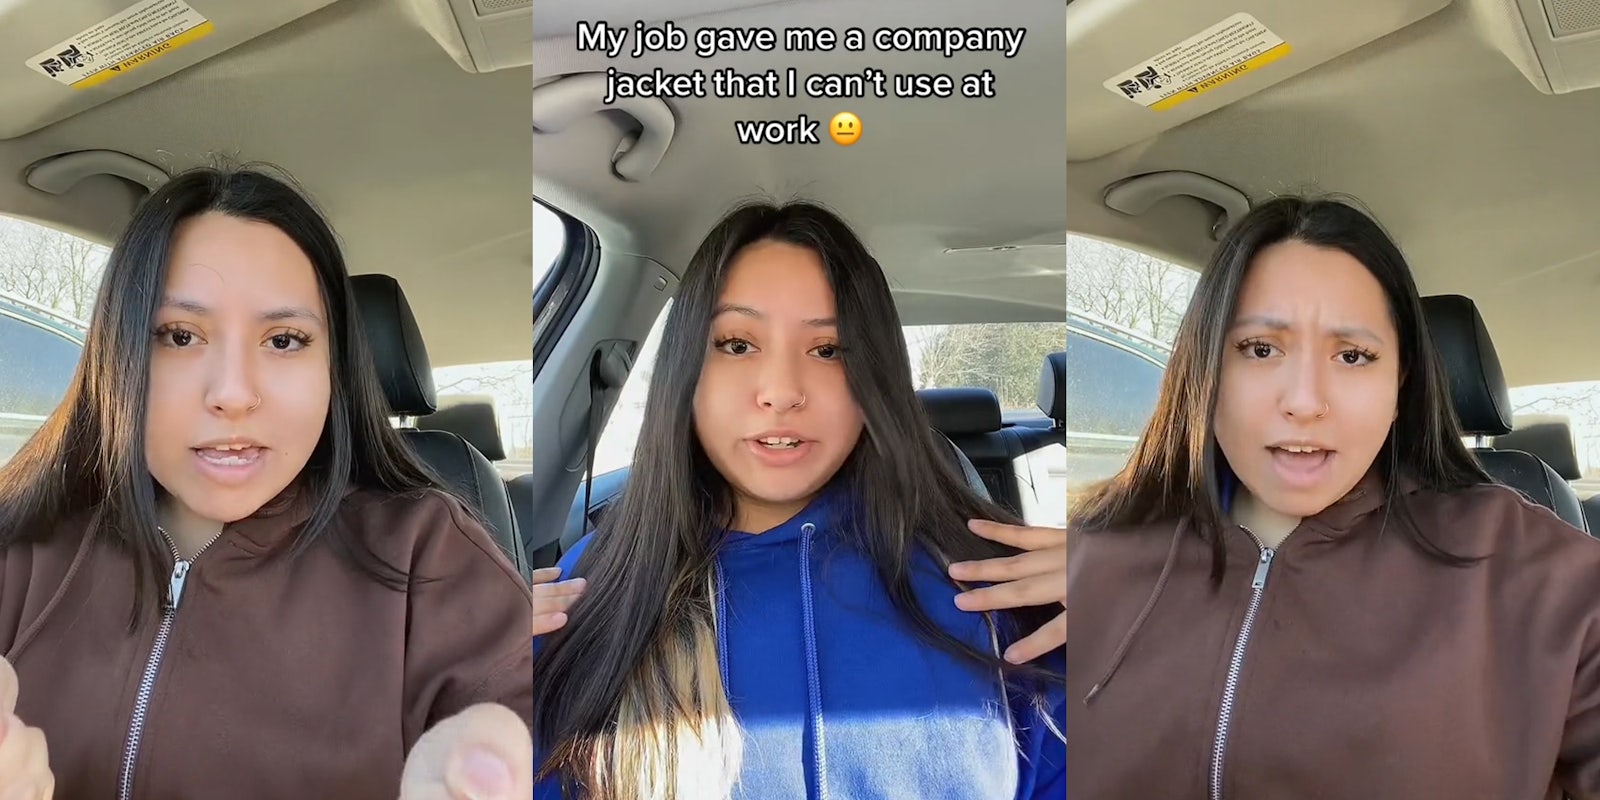 person speaking in car with hands out (l) person speaking in car with blue hoodie on and hands on shoulders with caption 'My job gave me a company jacket that I can't use at work' (c) person speaking in car (r)